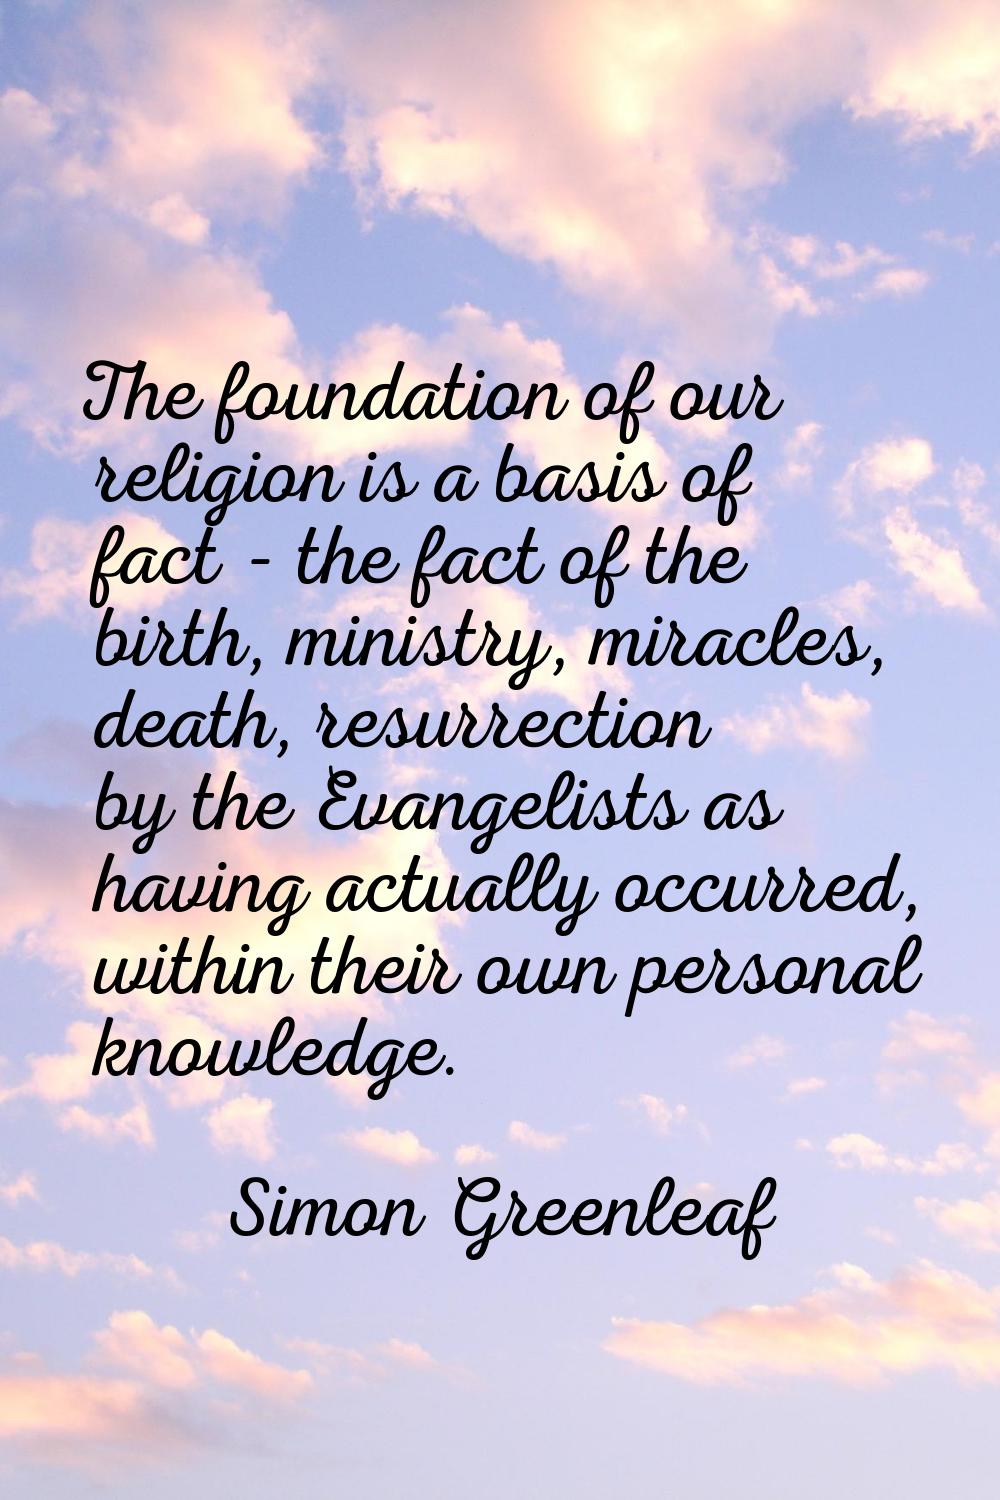 The foundation of our religion is a basis of fact - the fact of the birth, ministry, miracles, deat